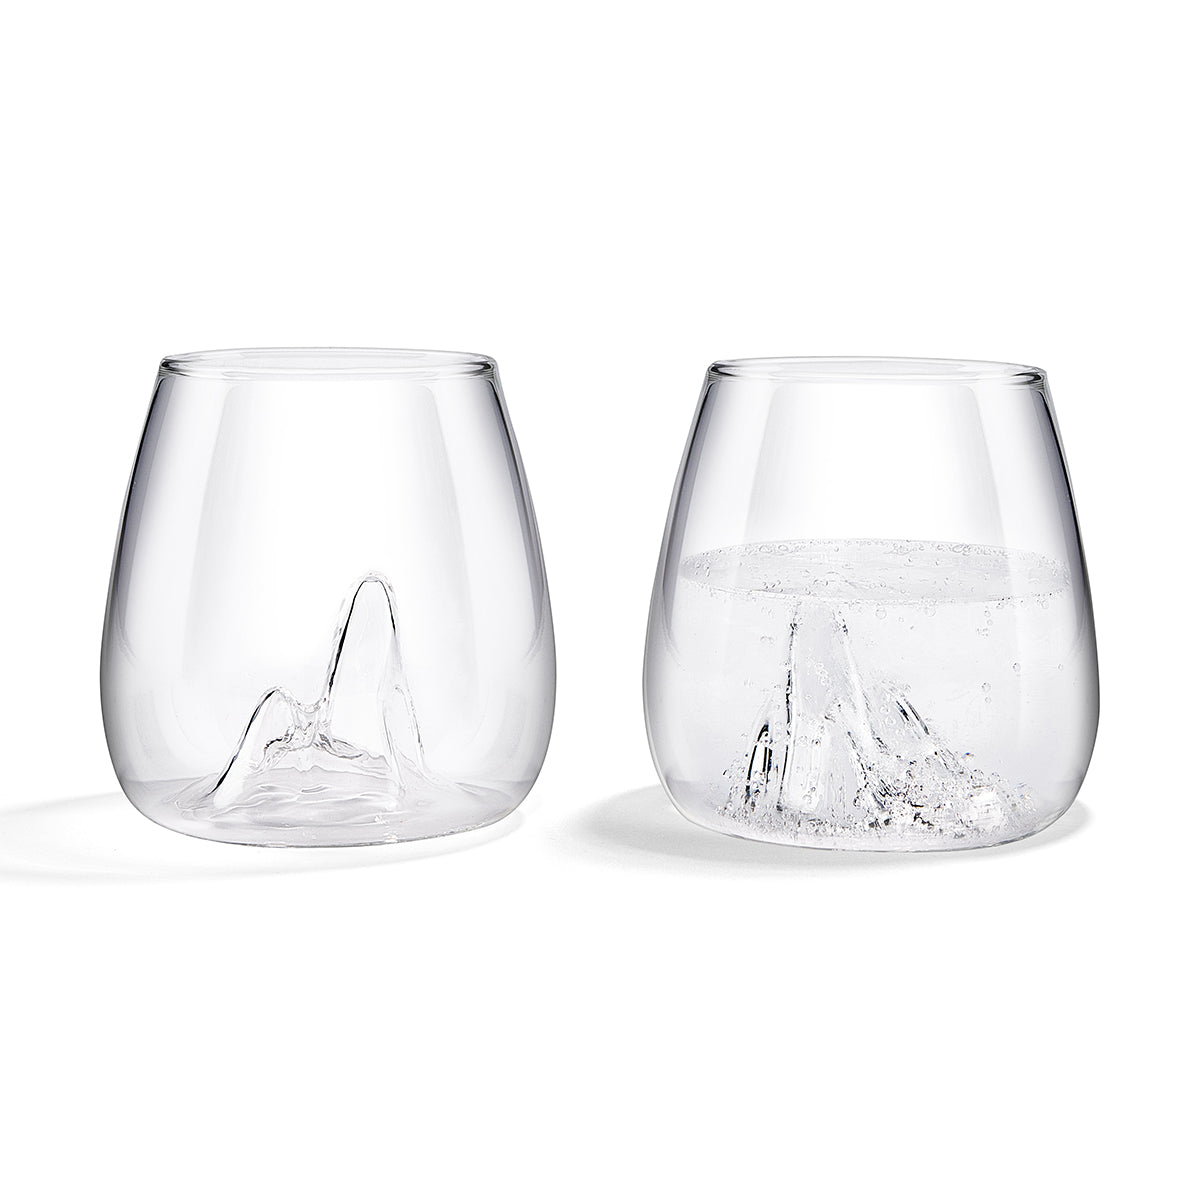 Image of a pair of glass tumblers with the shape of a mountain peak indented into their base. 1 glass is filled with sparling water. Set against a white background.